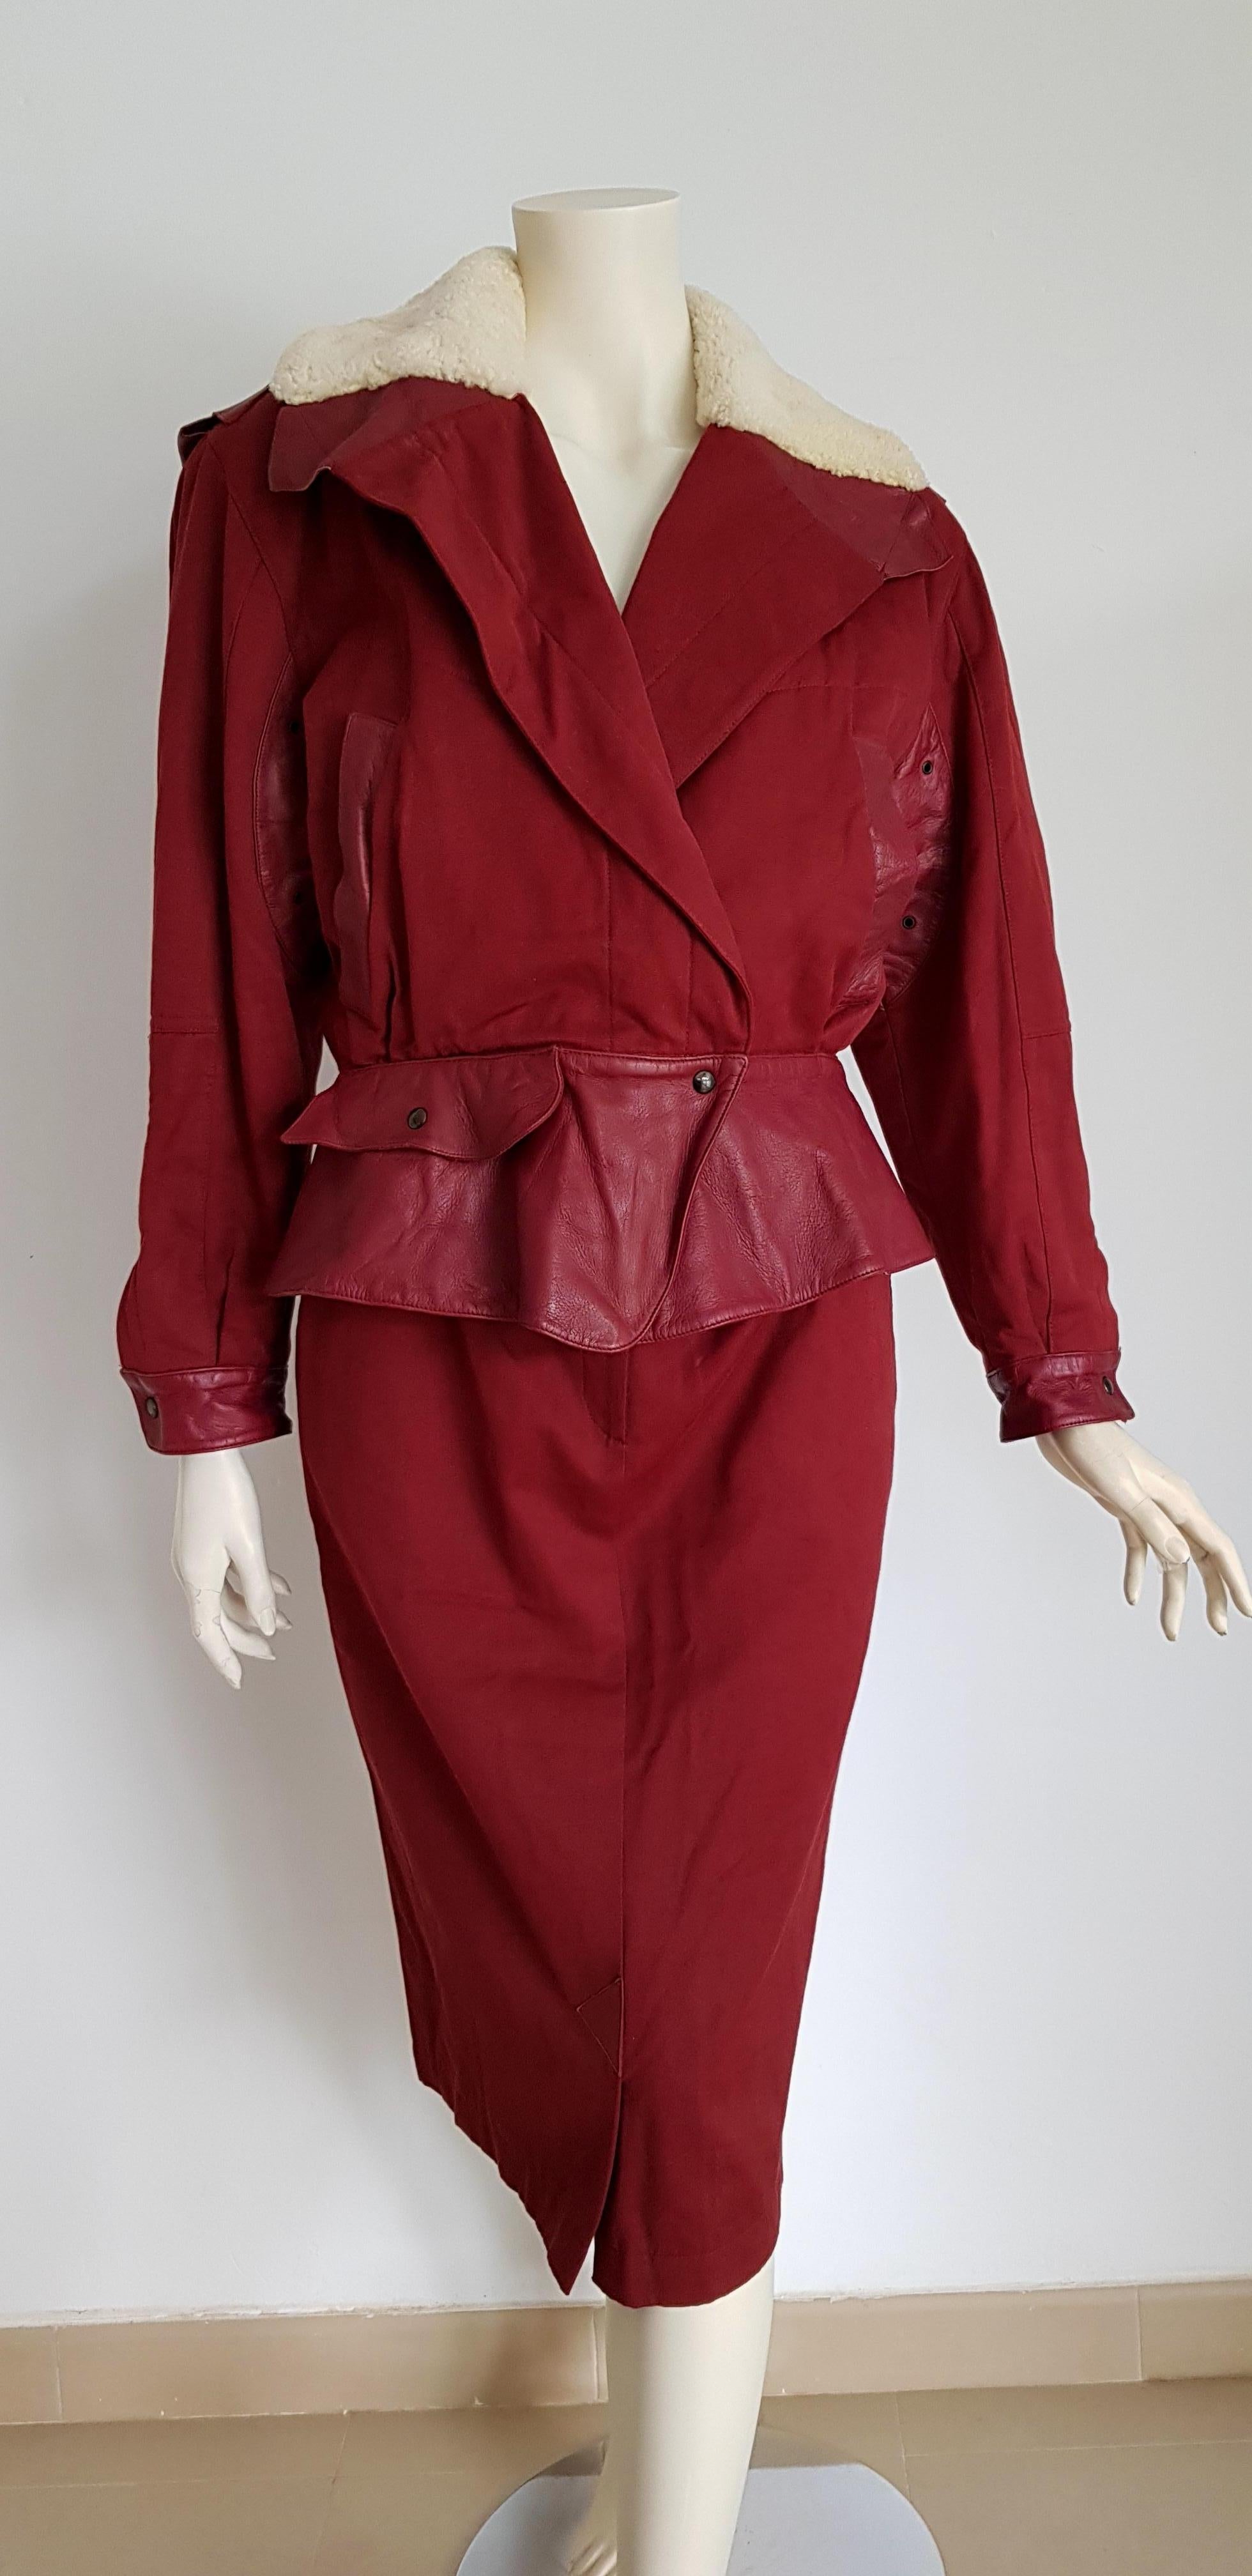 Claude MONTANA leather and cotton jacket and skirt burgundy suit - Unworn, New.
..
SIZE: equivalent to about Small / Medium, please review approx measurements as follows in cm. 
JACKET: lenght 65, chest underarm to underarm 60, bust circumference